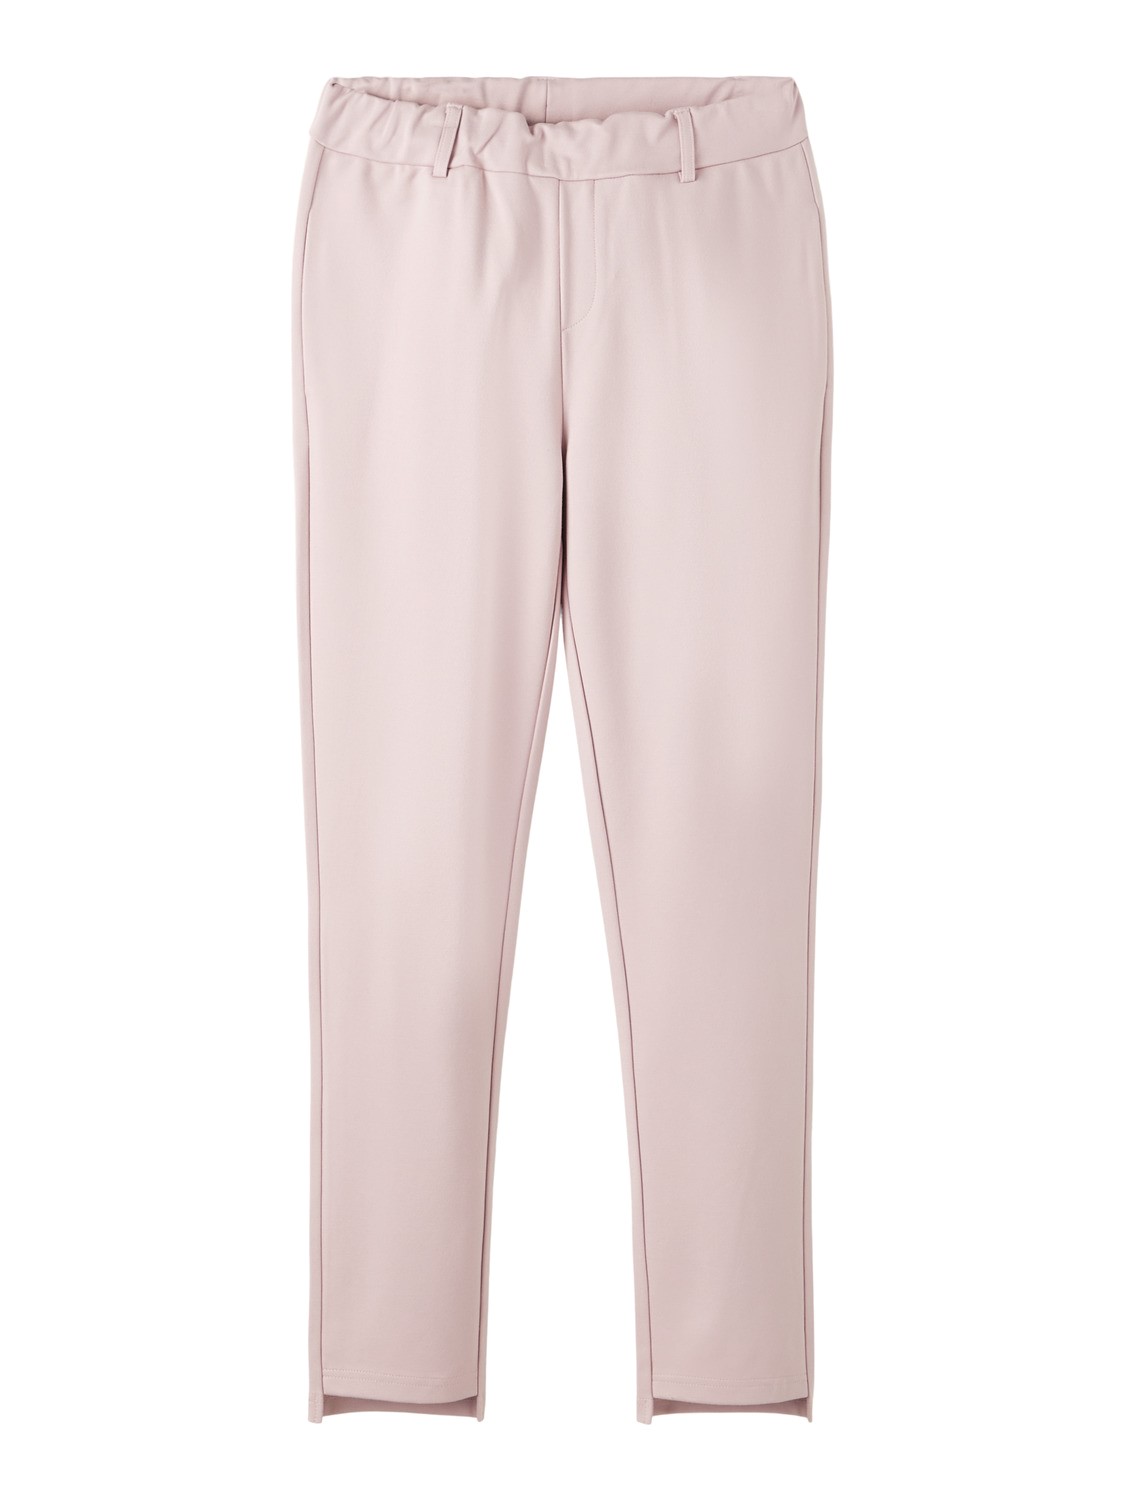 Dida Normal Pant - Violet Ice